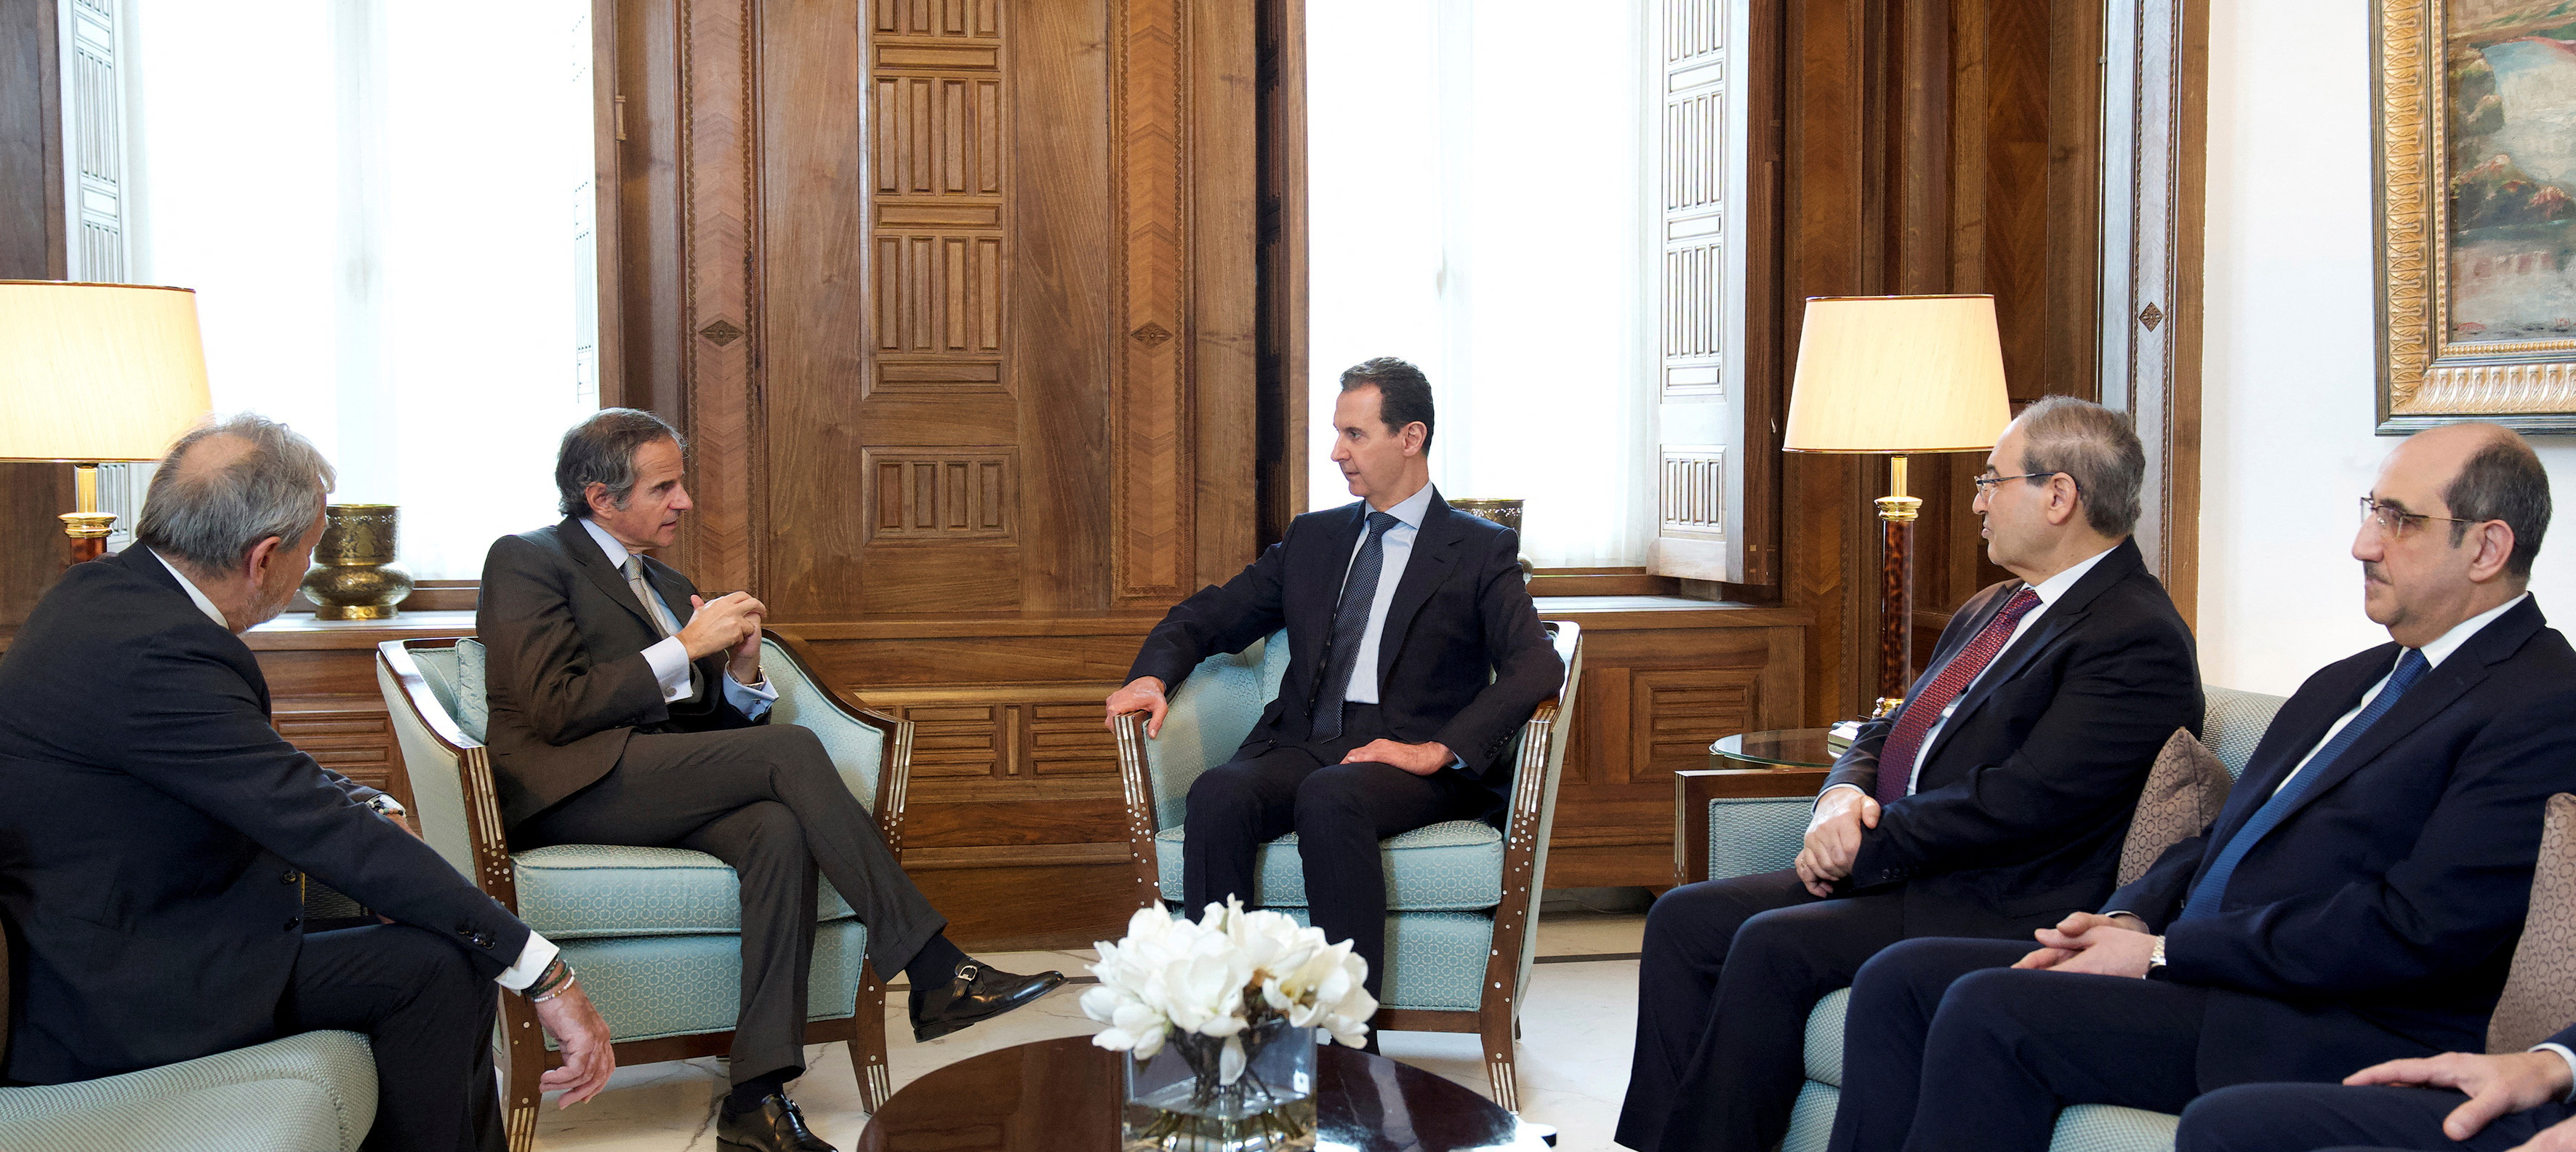 Syria's President Bashar al-Assad meets with International Atomic Energy Agency Director General Rafael Mariano Grossi in Damascus